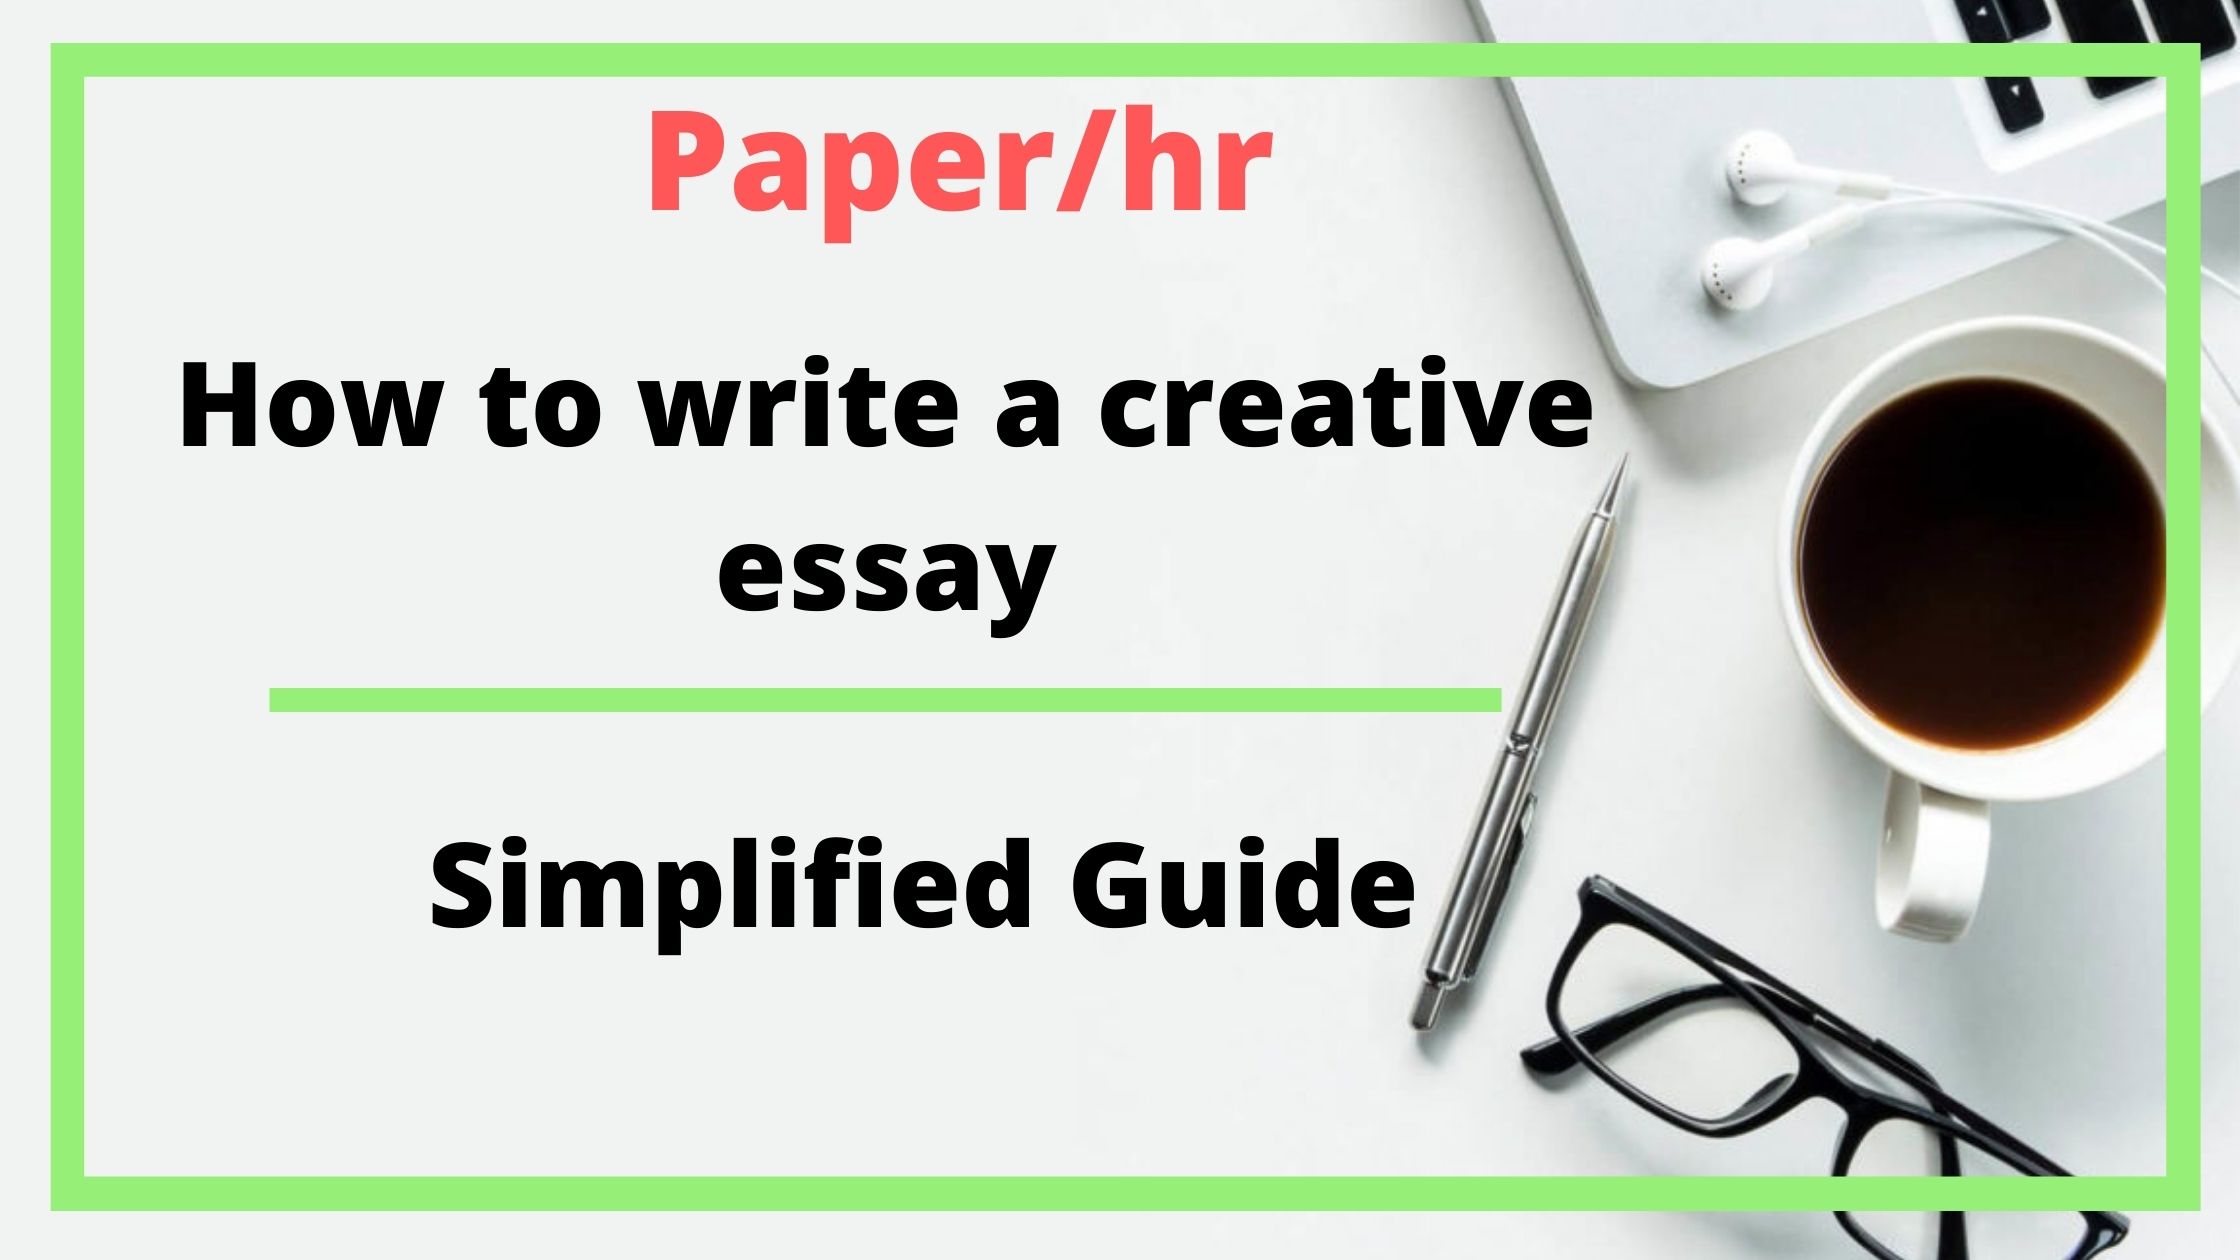 How to write a creative essay: Simplified guide